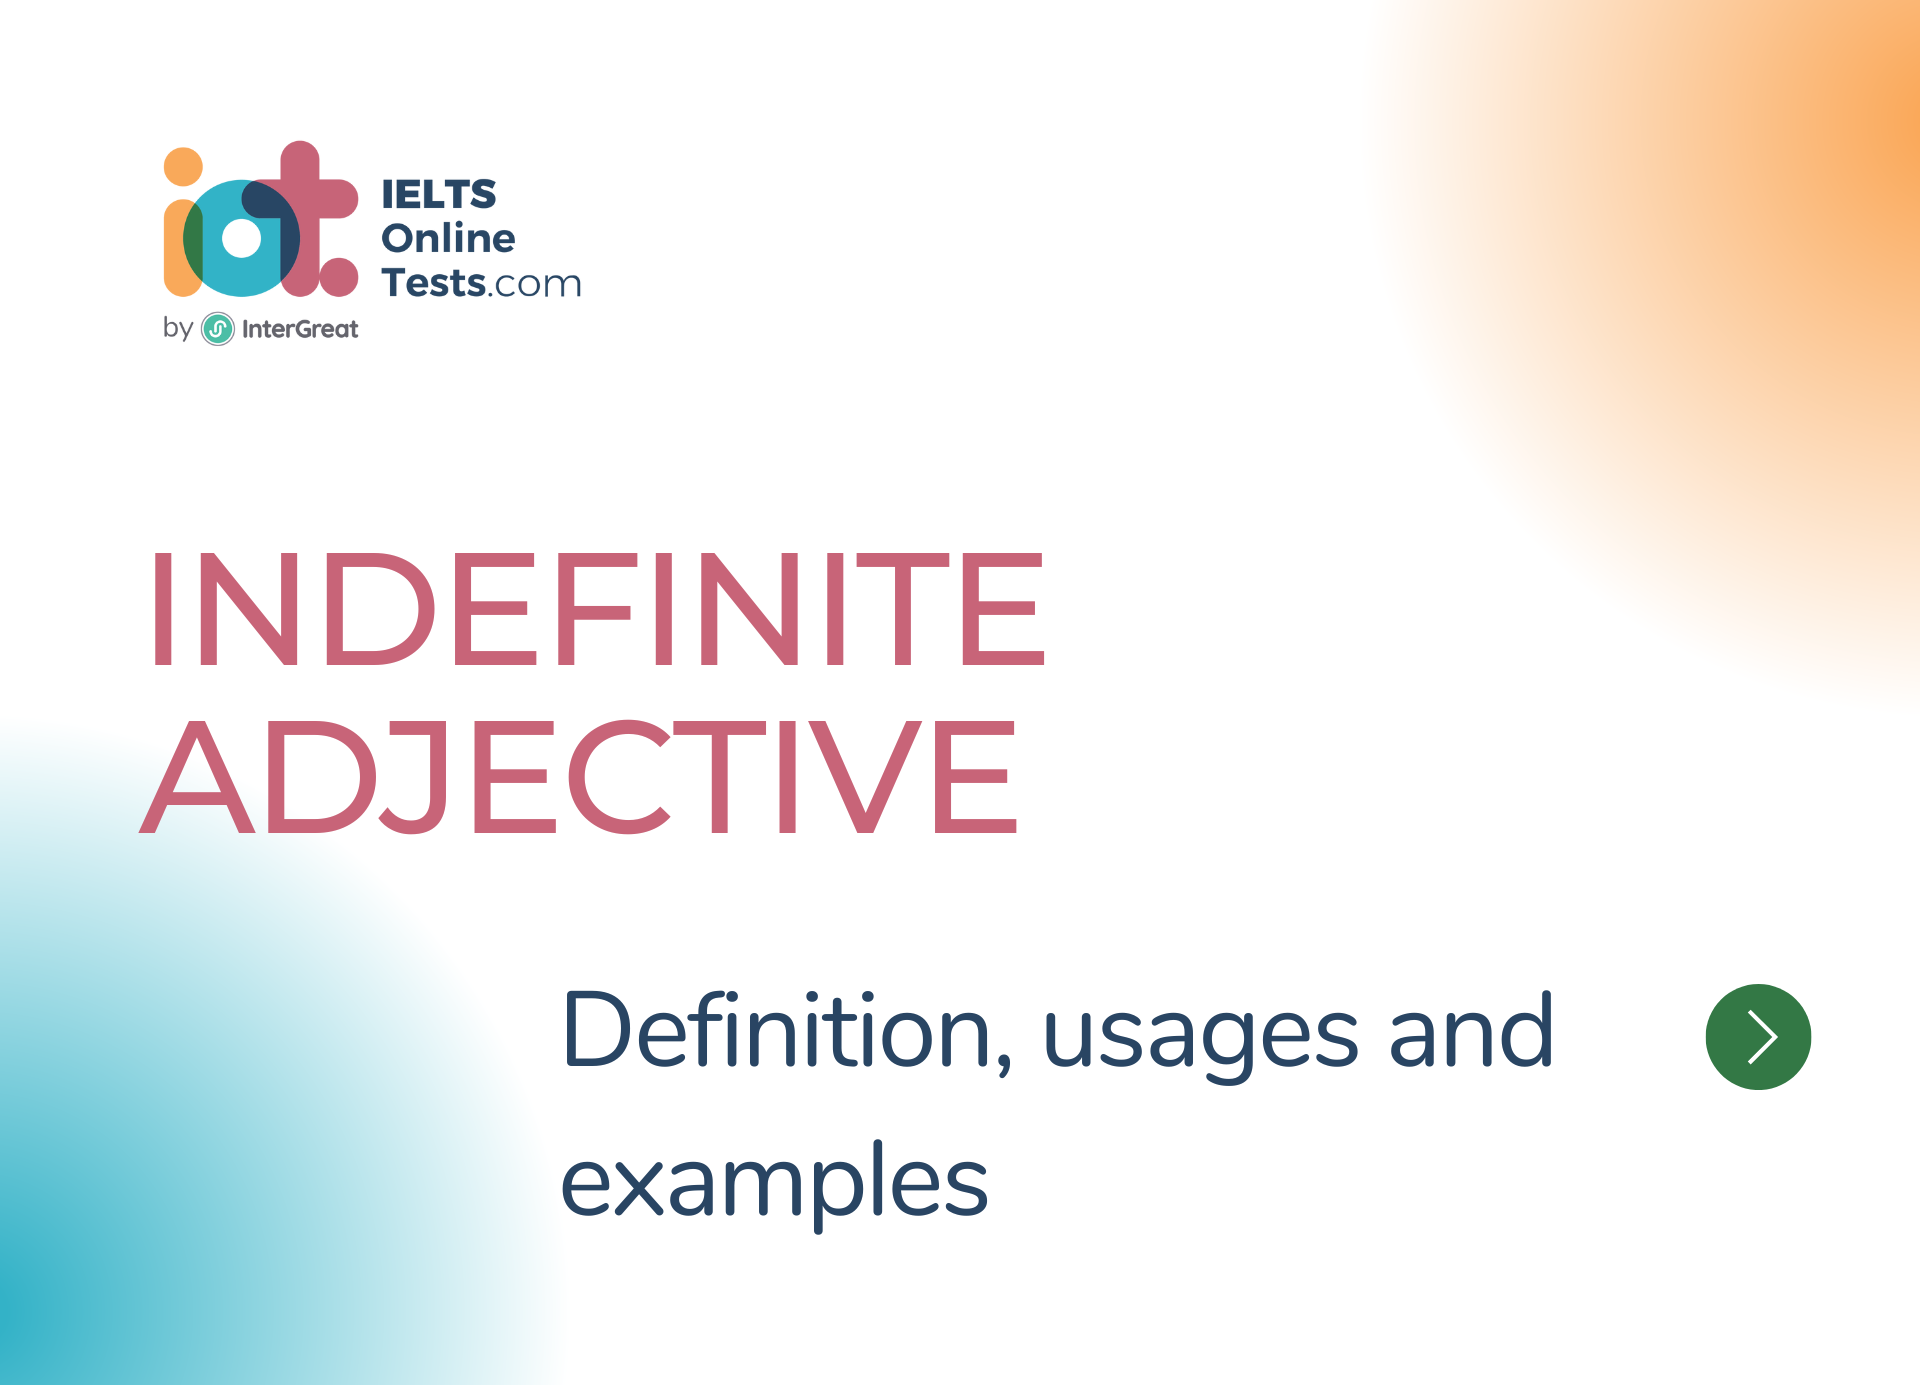 Indefinite Adjective definition, usages and examples